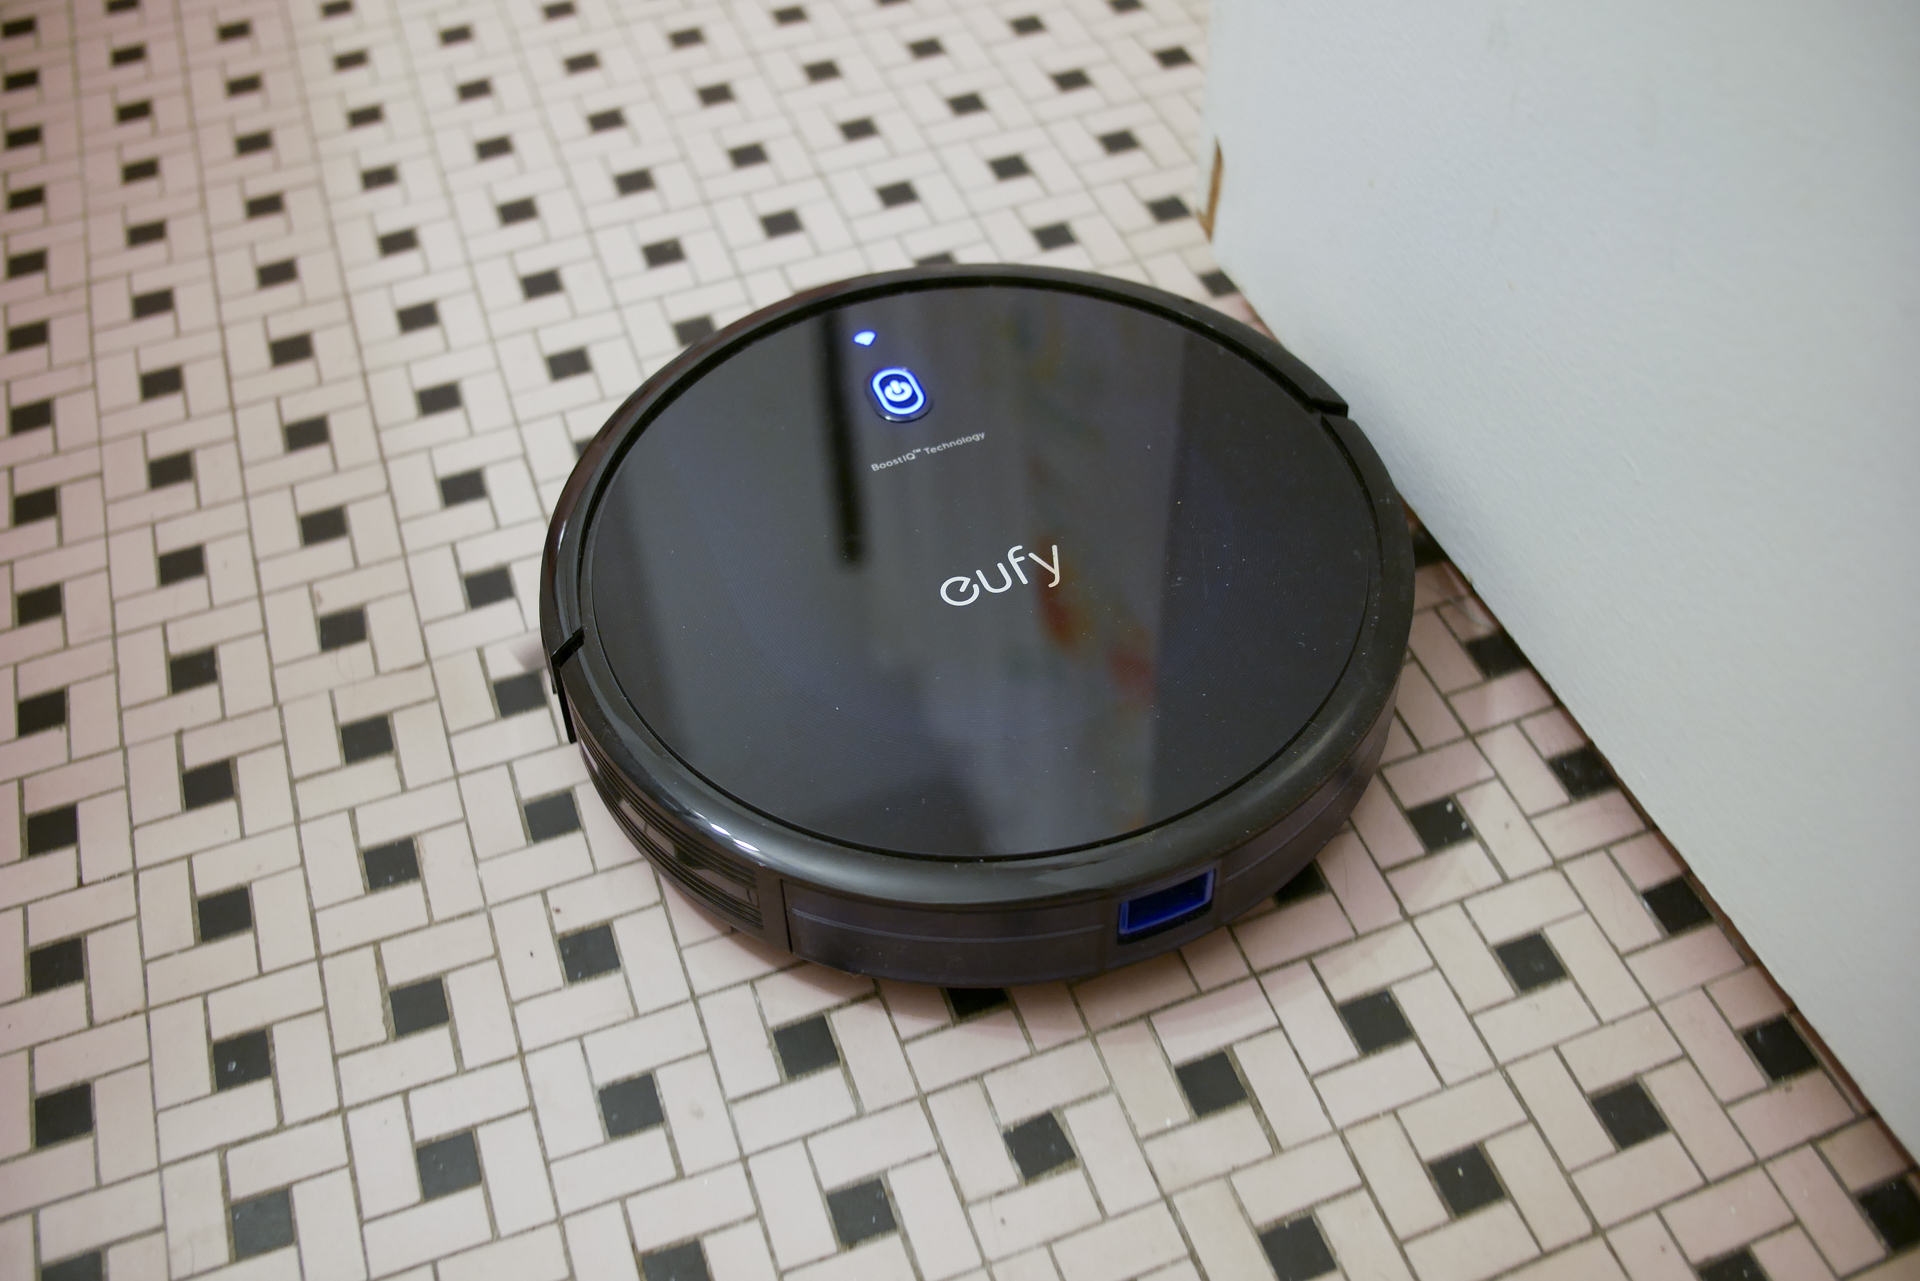 Eufy Robovac 15c Max Review: One of the Best Budget Robot